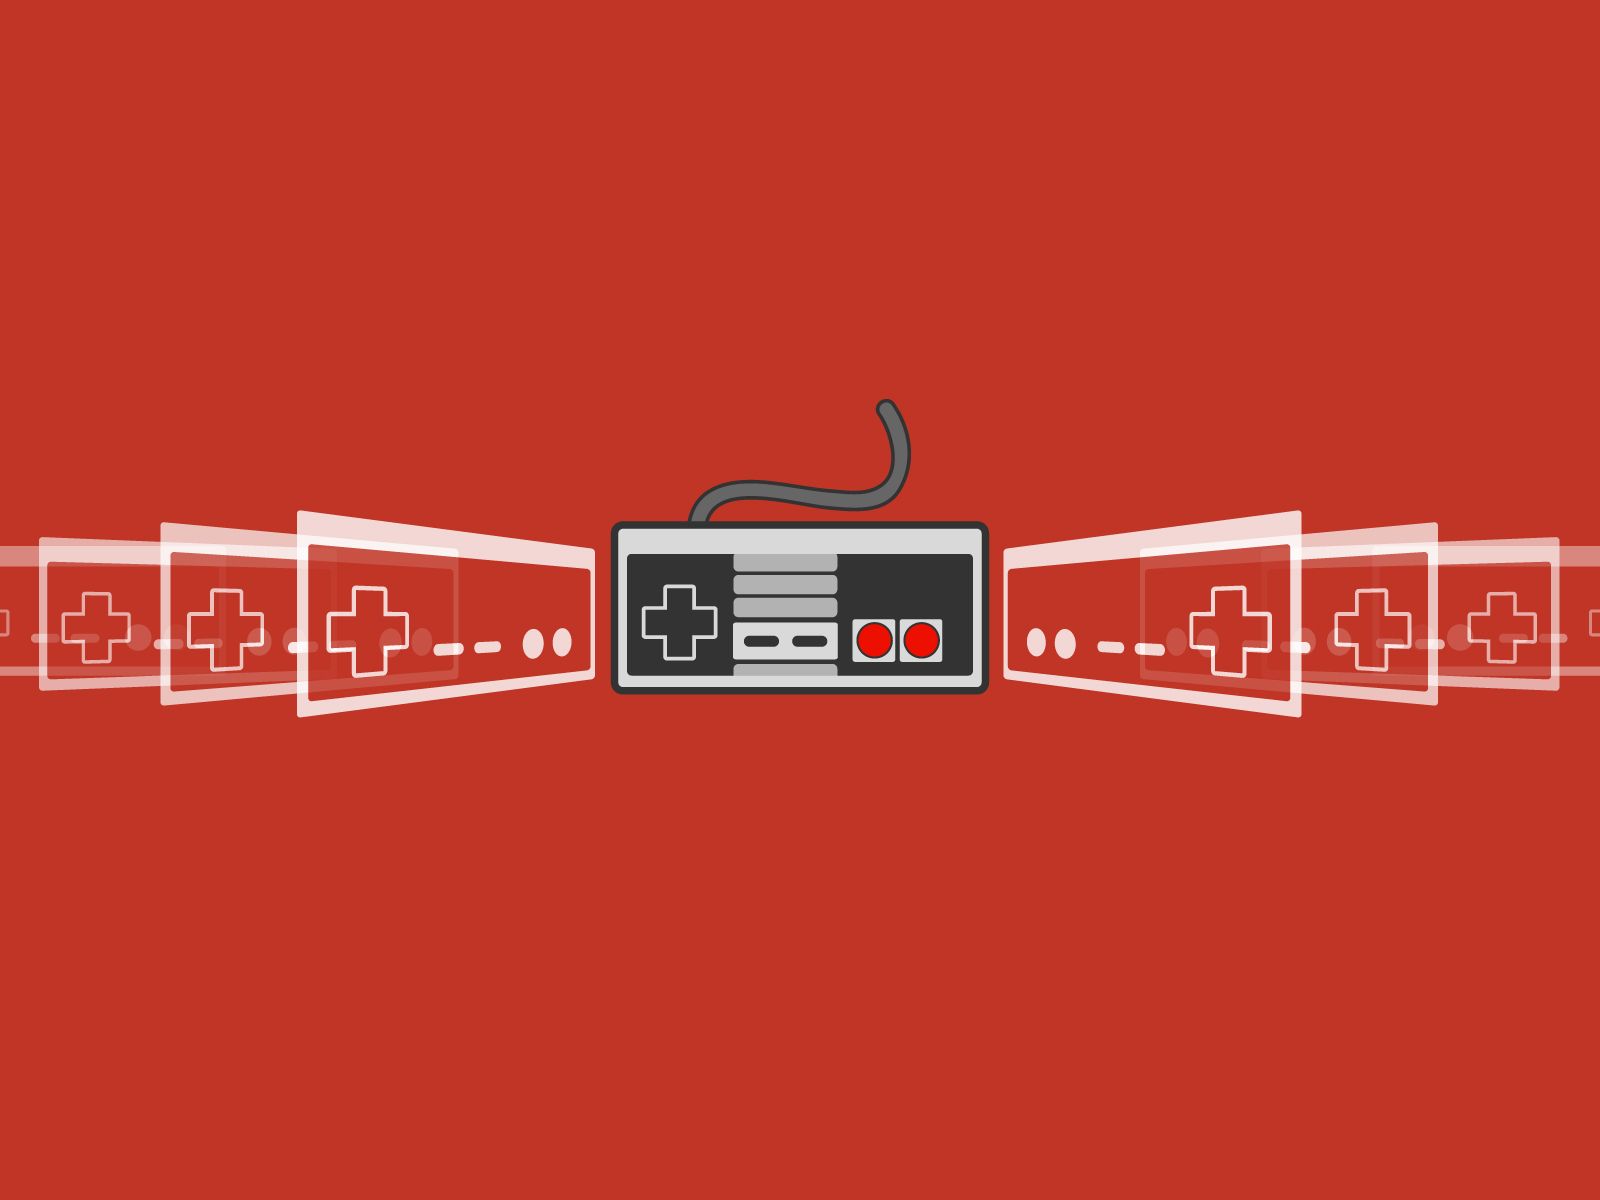 Nintendo Entertainment System Wallpaper and Background Imagex1200